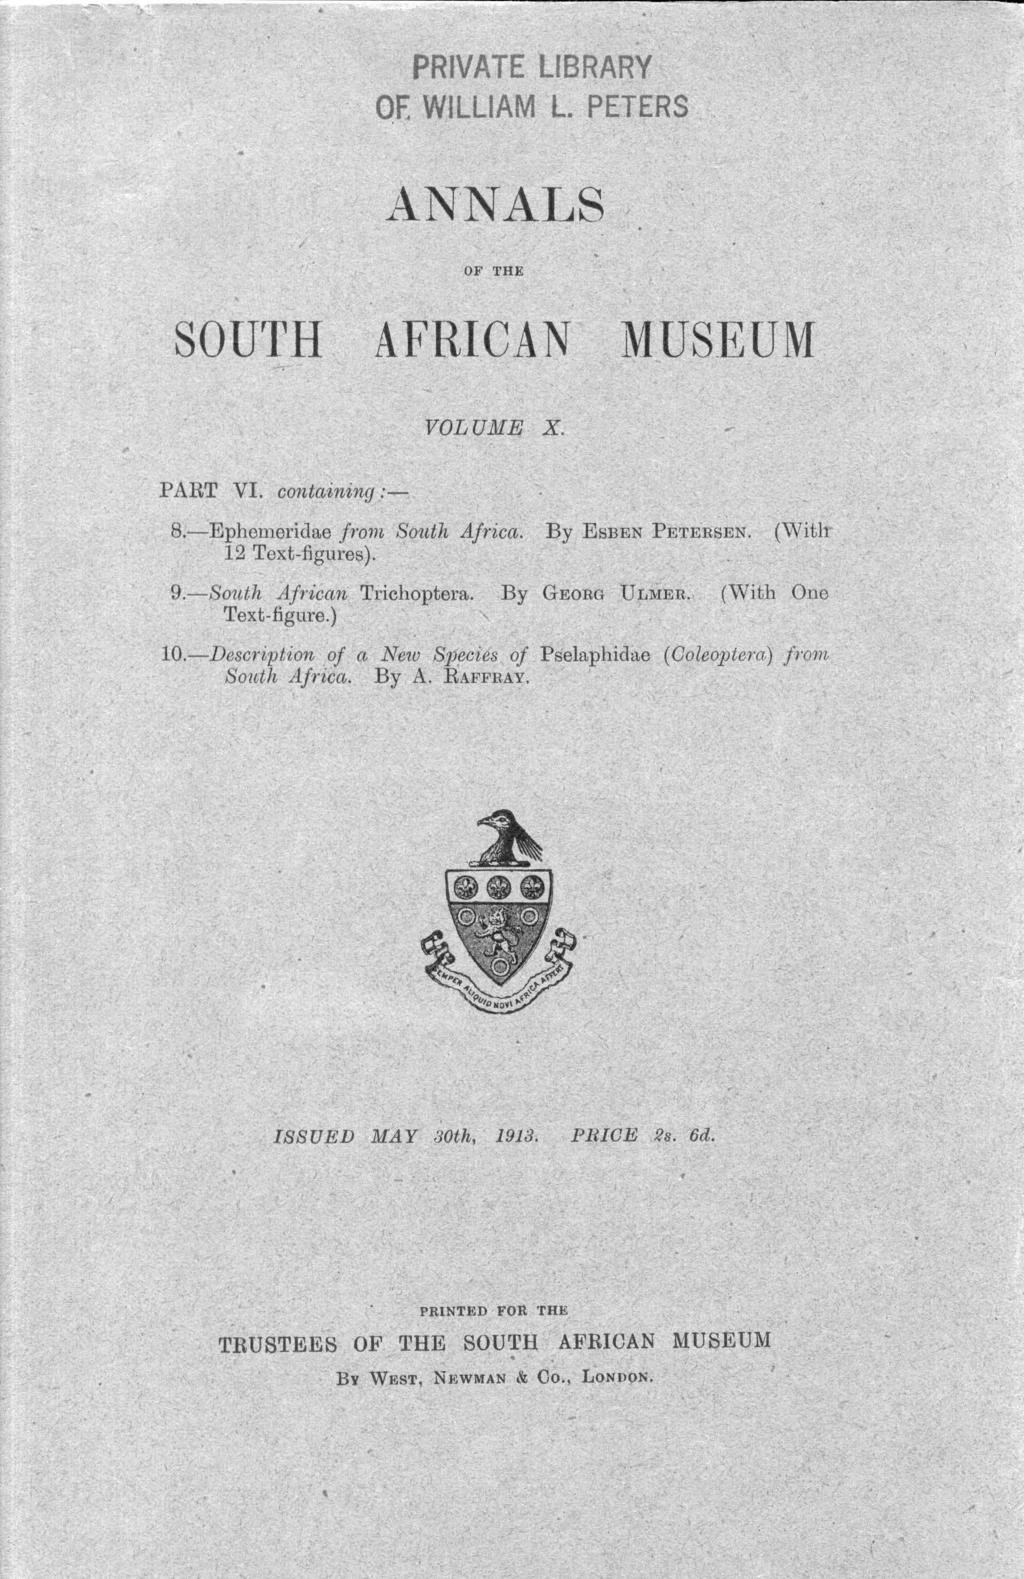 PRIVATE LIBRARY OE WILLIAM L. PETERS ANNALS OF THE SOUTH AFRICAN MUSEUM VOLUME X. PART VI. containing:- 8.-Ephemeridae from Soitth Africa. By EsBEN PETERSEN. (With 12 Text-figures). 9.